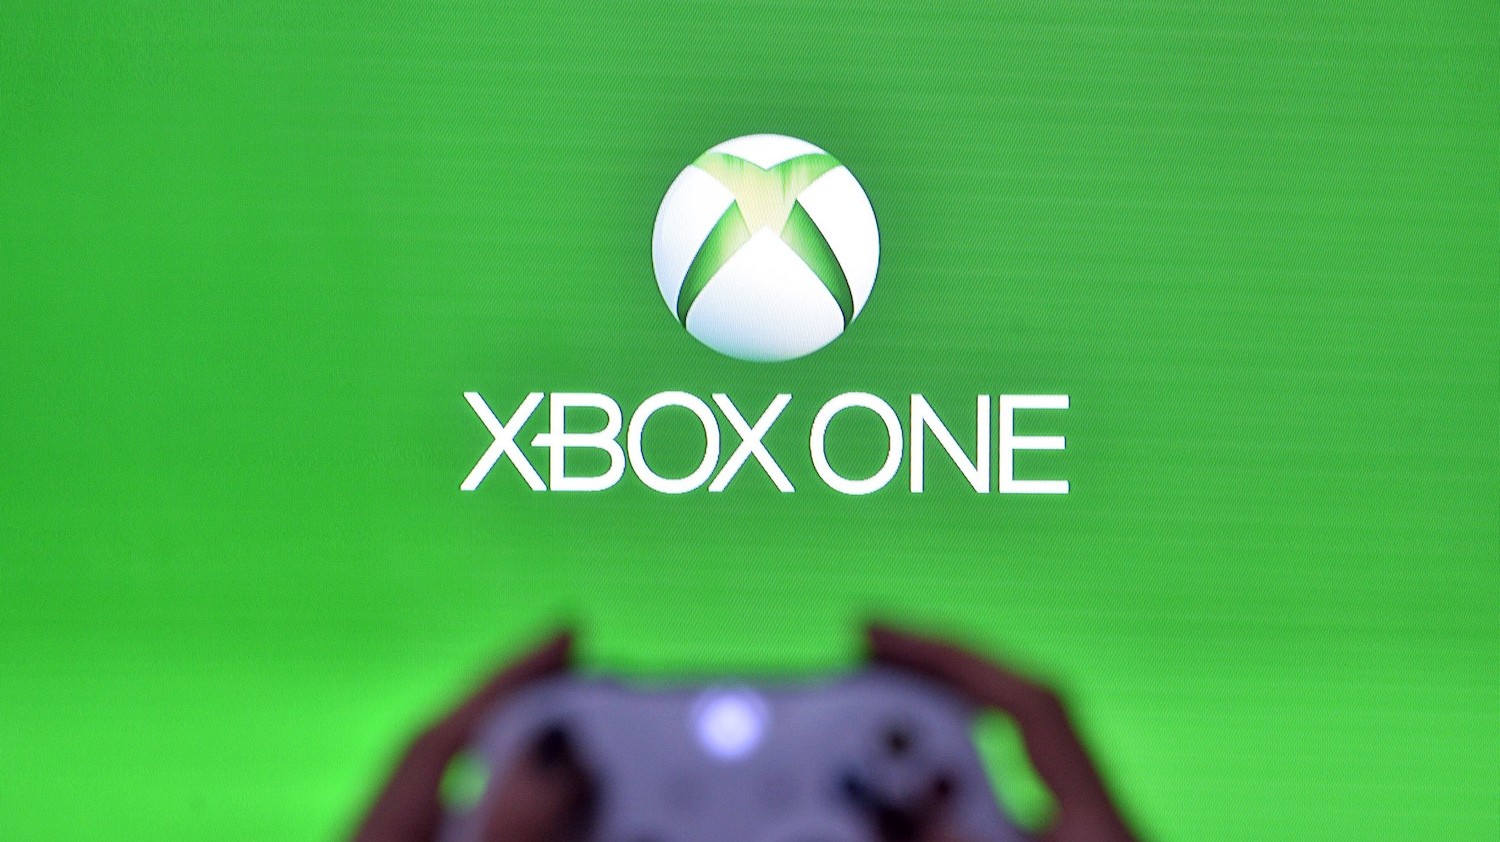 Microsoft Contractors Listened To Xbox Owners In Their Homes